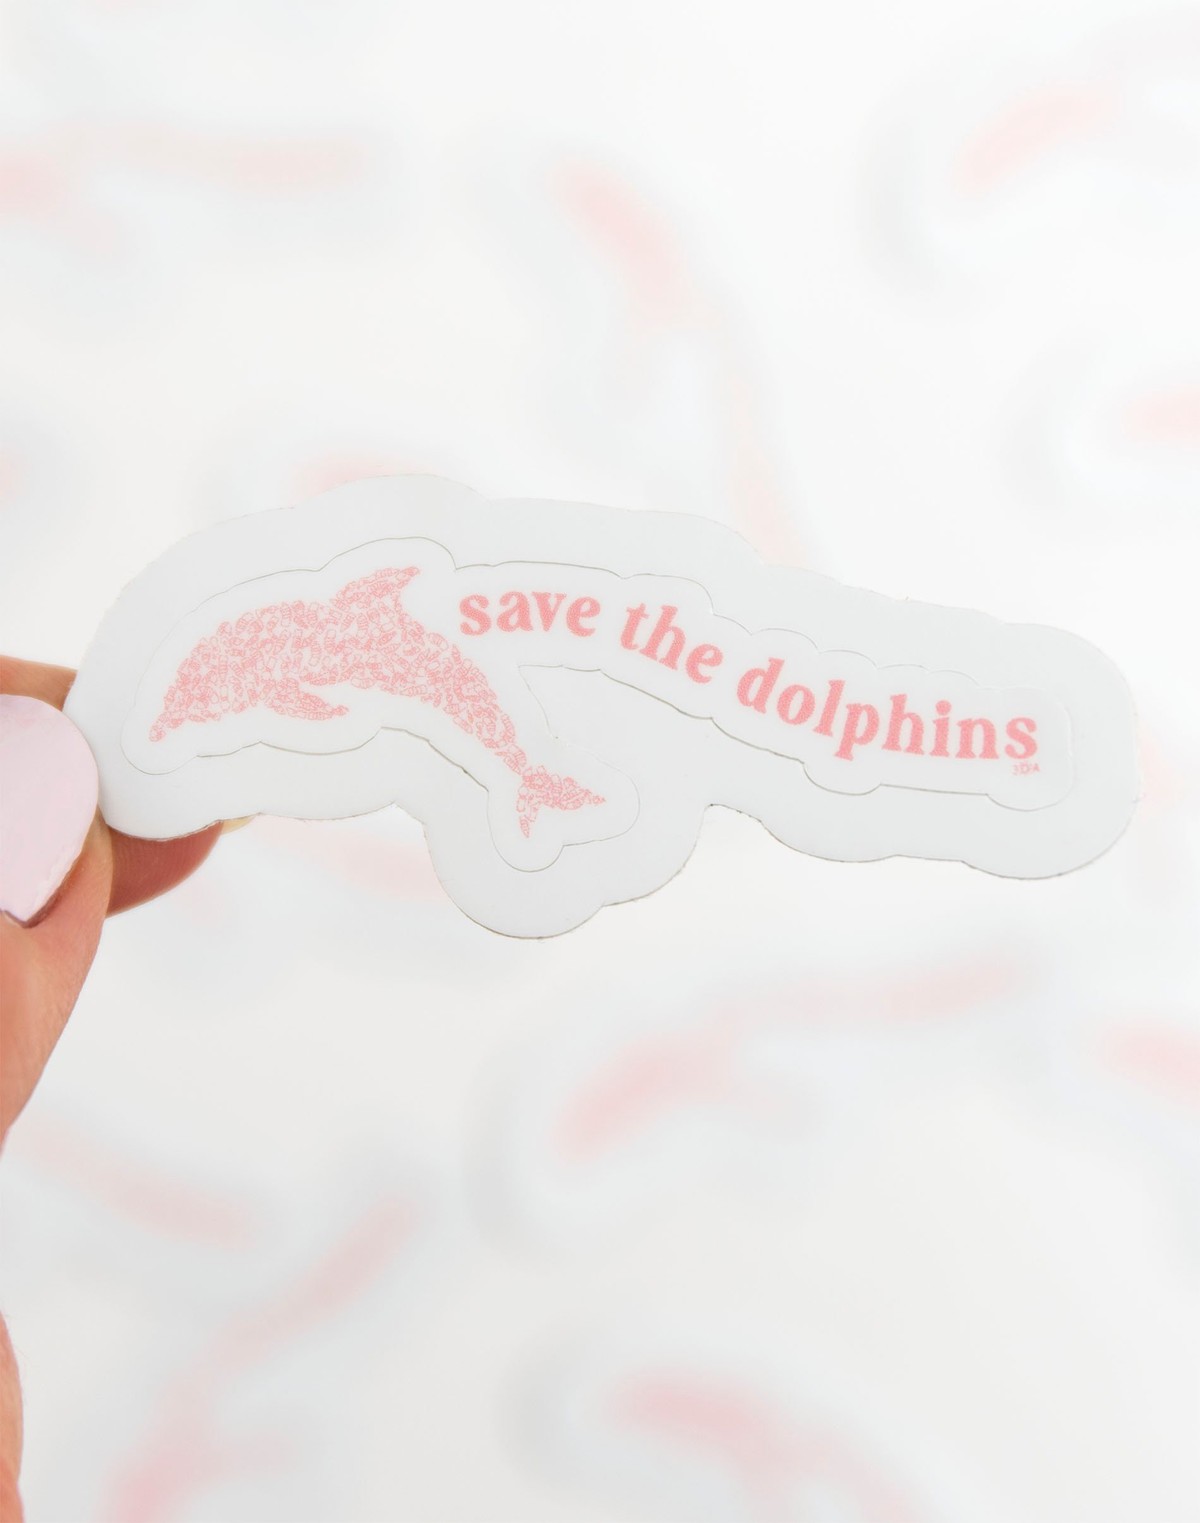 Save The Dolphins Wave Decal Sticker item